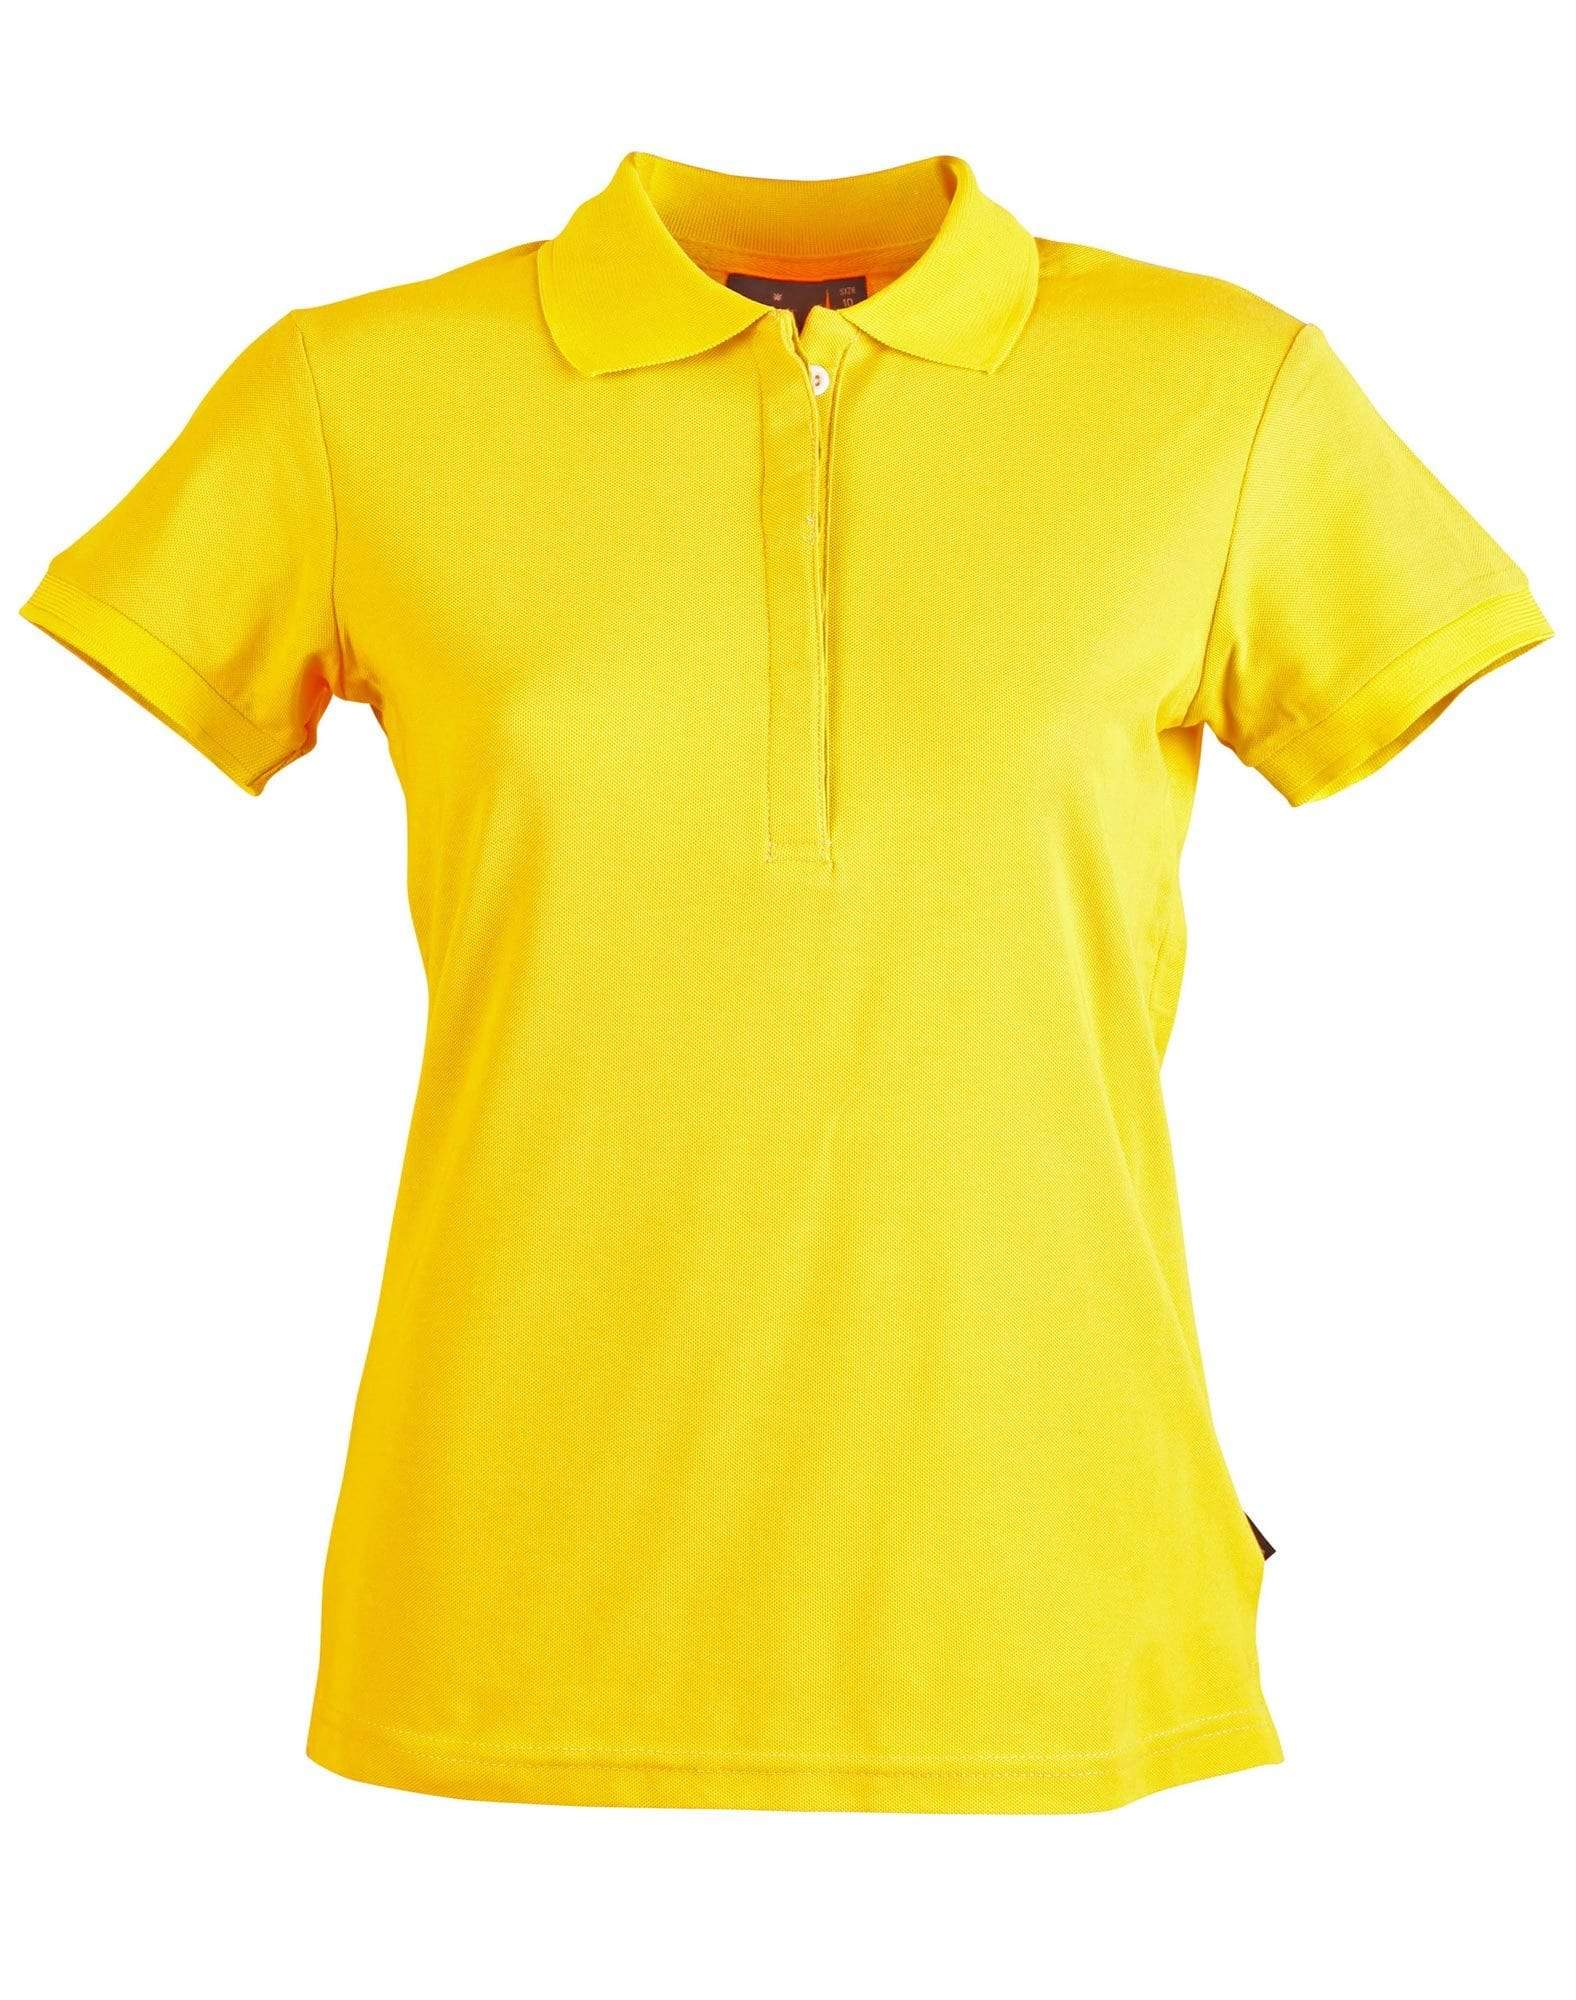 Connection Polo Ladies' Ps64 Casual Wear Winning Spirit Gold, Grey 8 